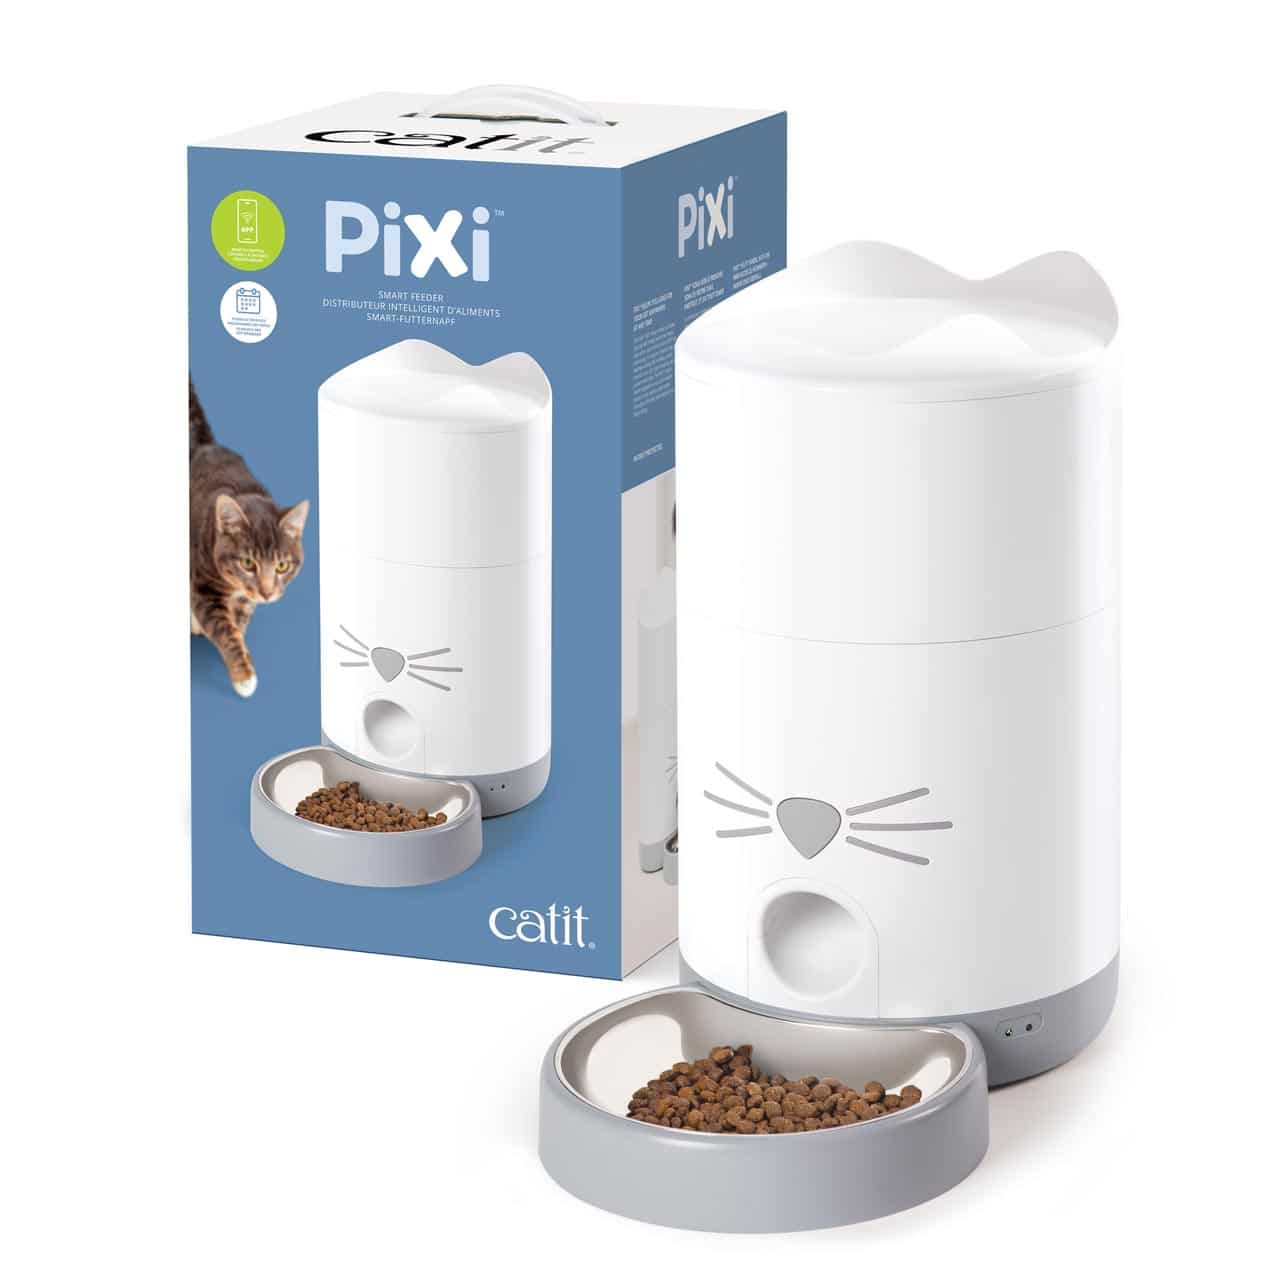 PIXI Smart Feeder and packaging